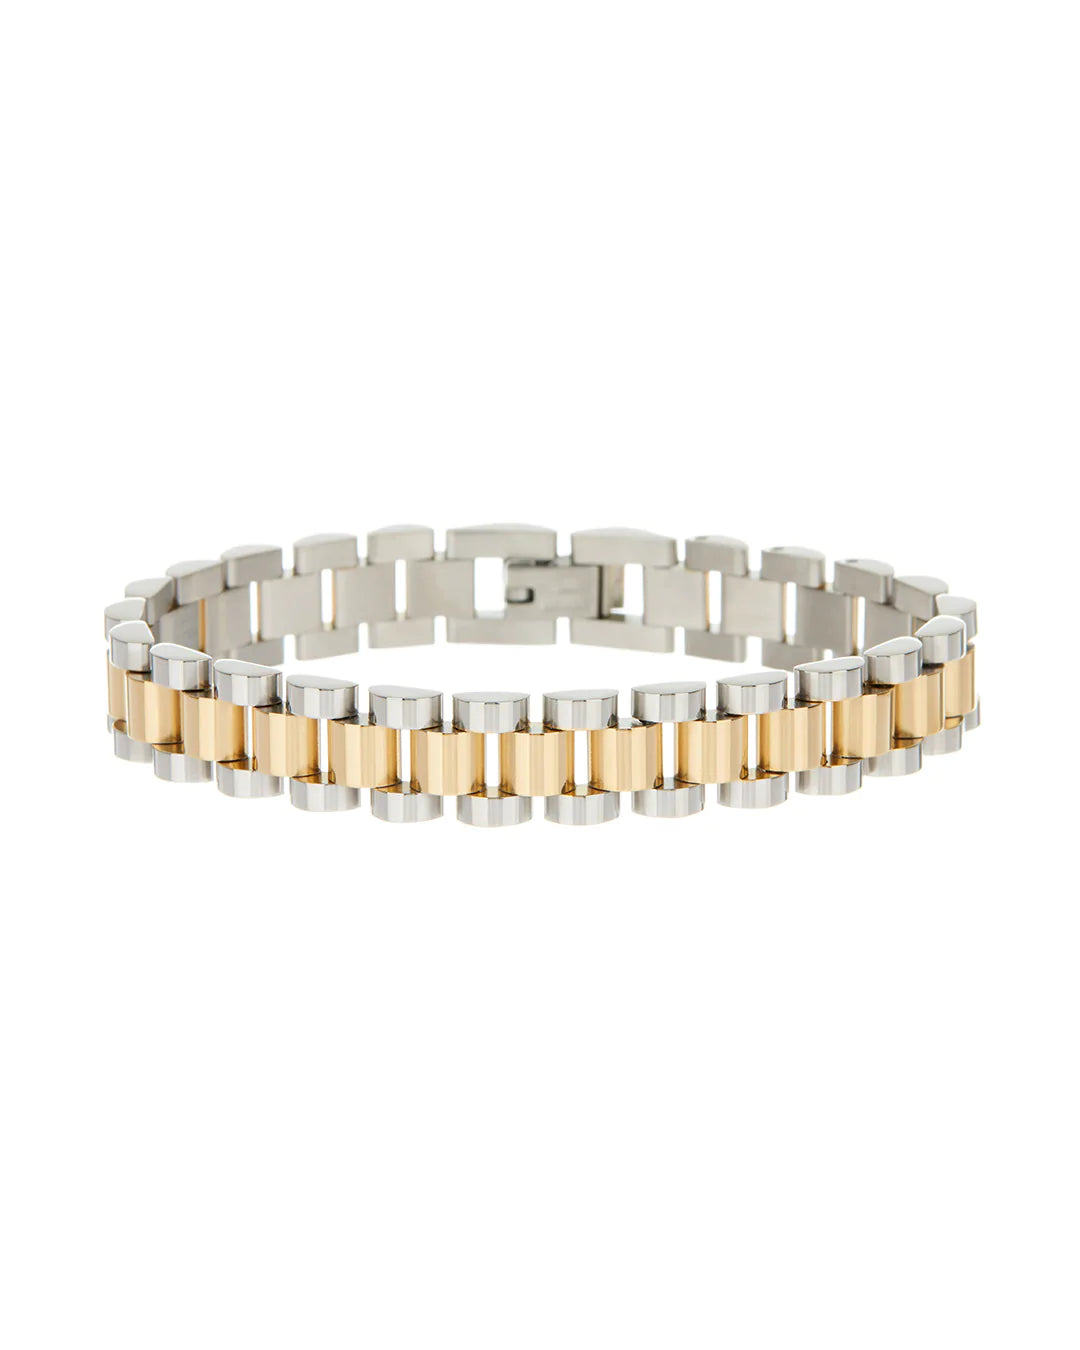 Two-toned timepiece bracelet - combo